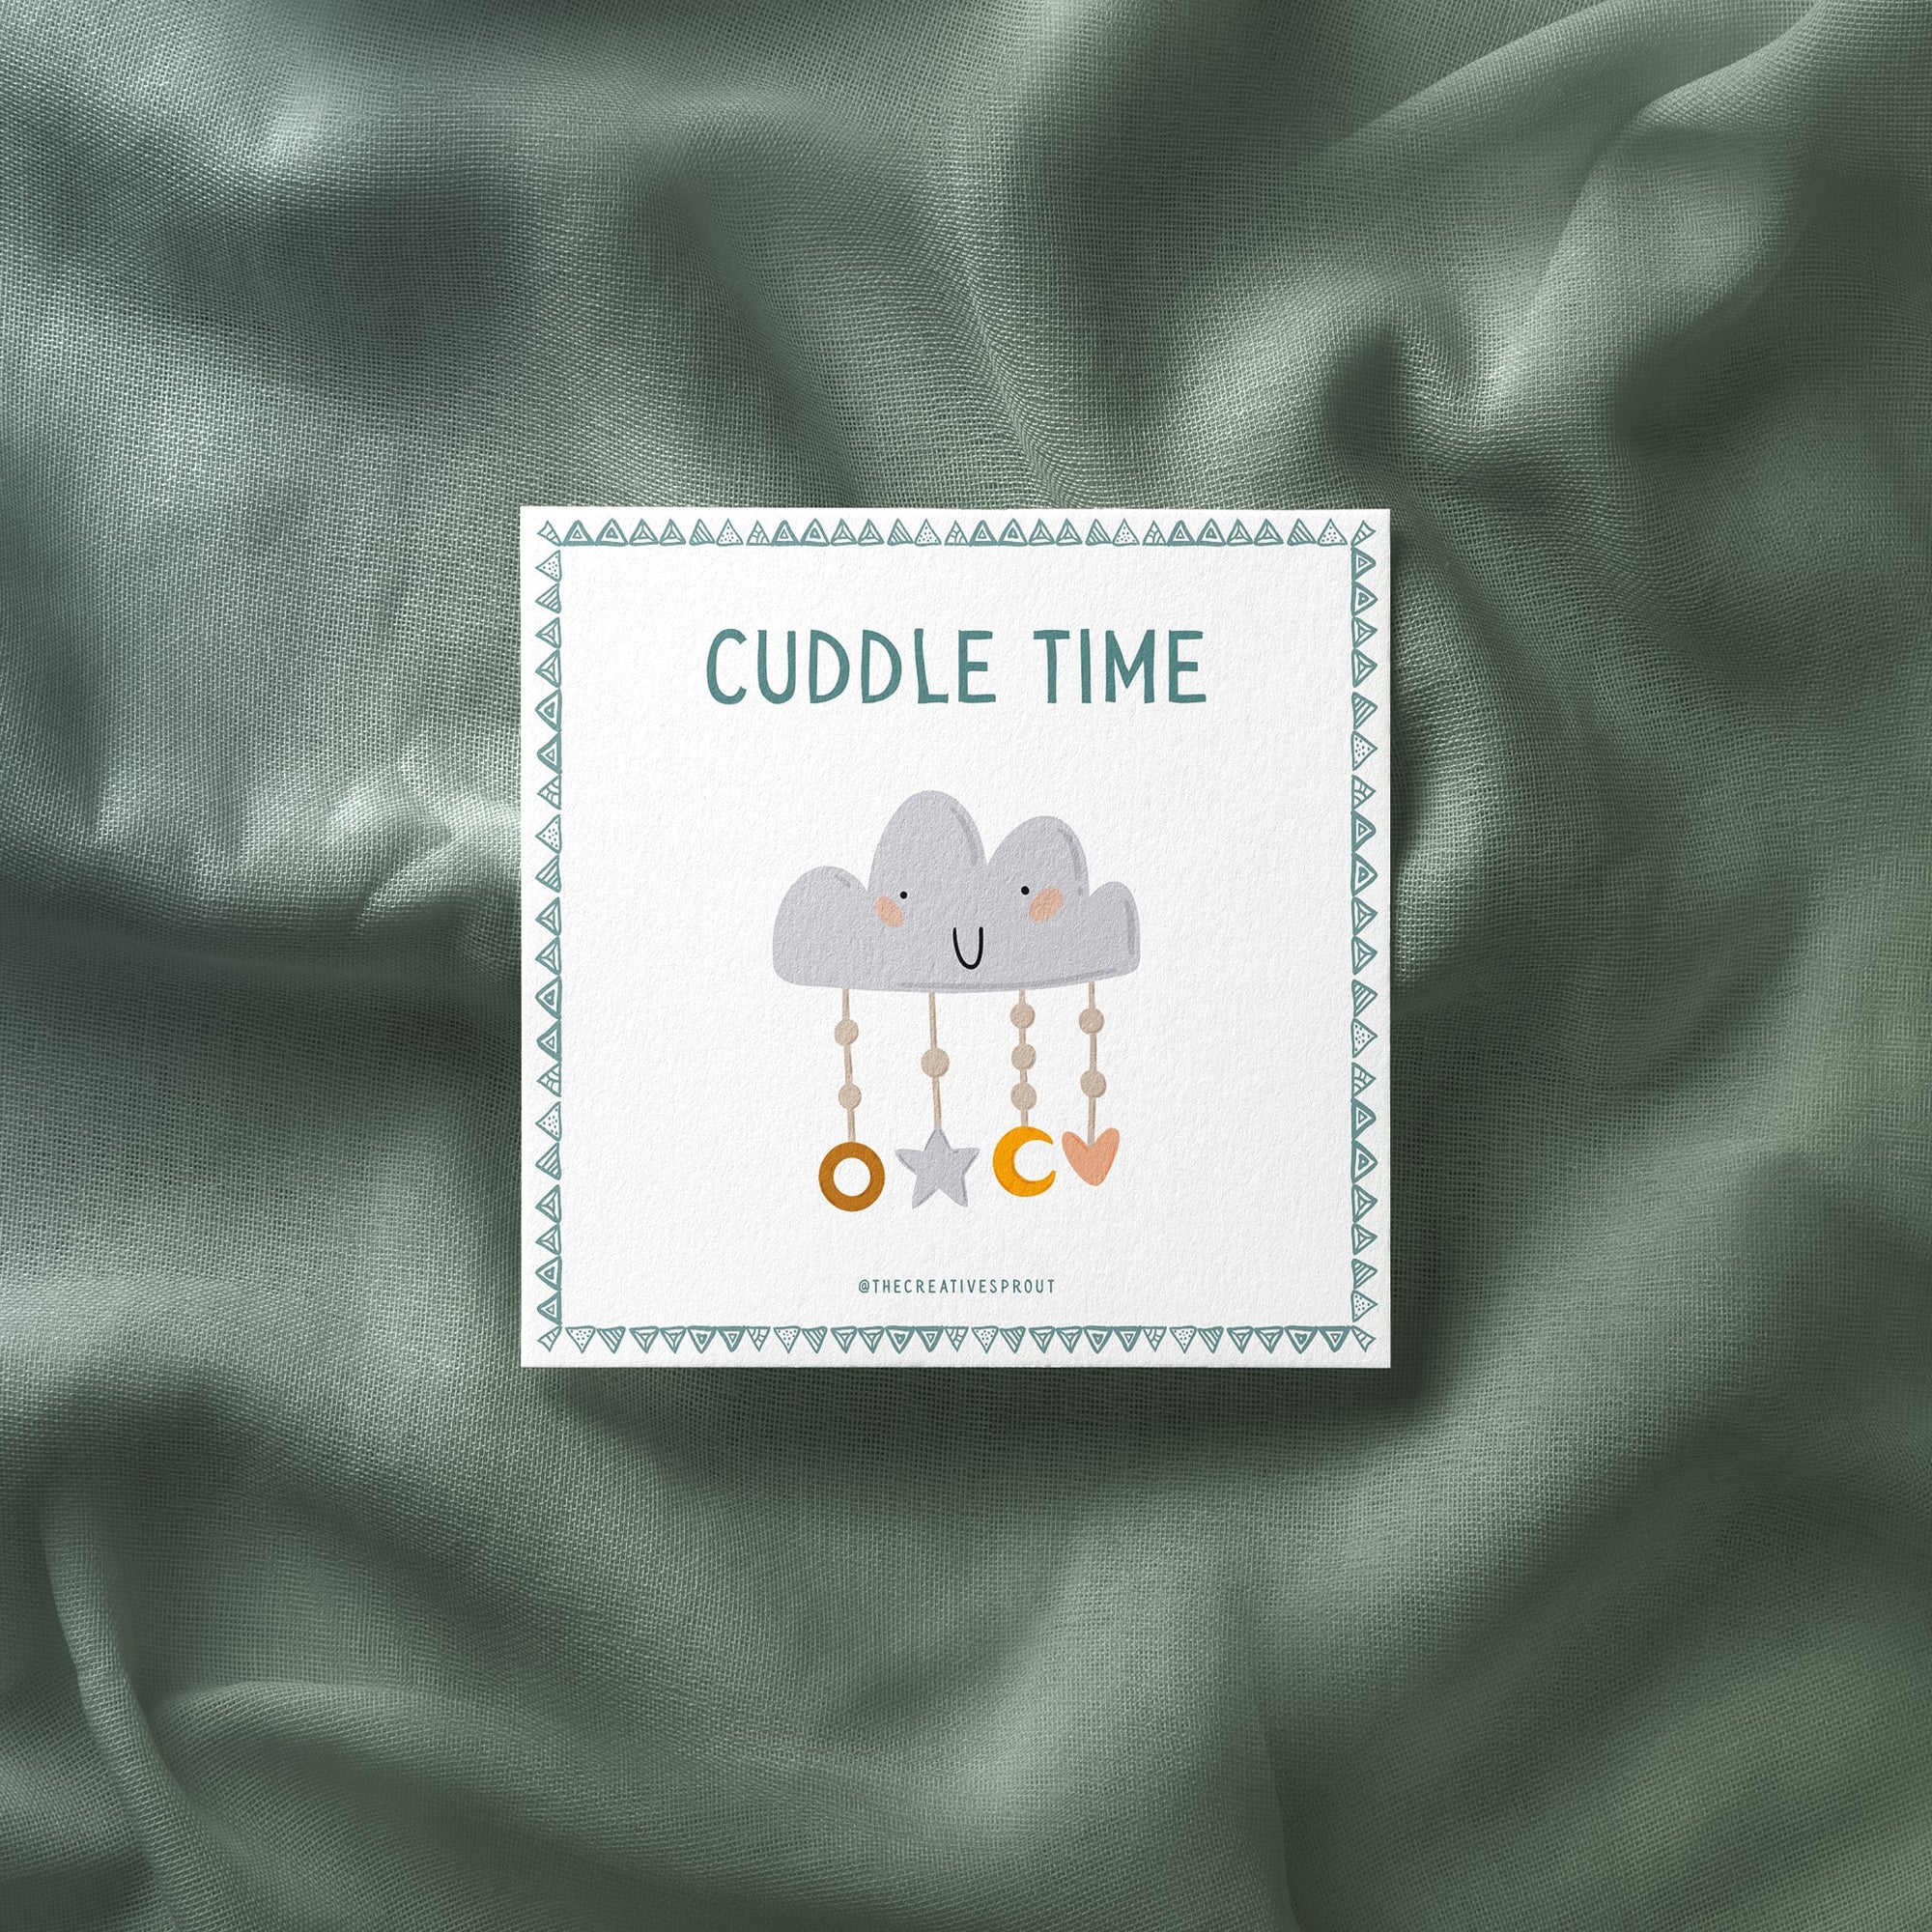 toddler bedtime routine card with hand drawn illustration in boho style